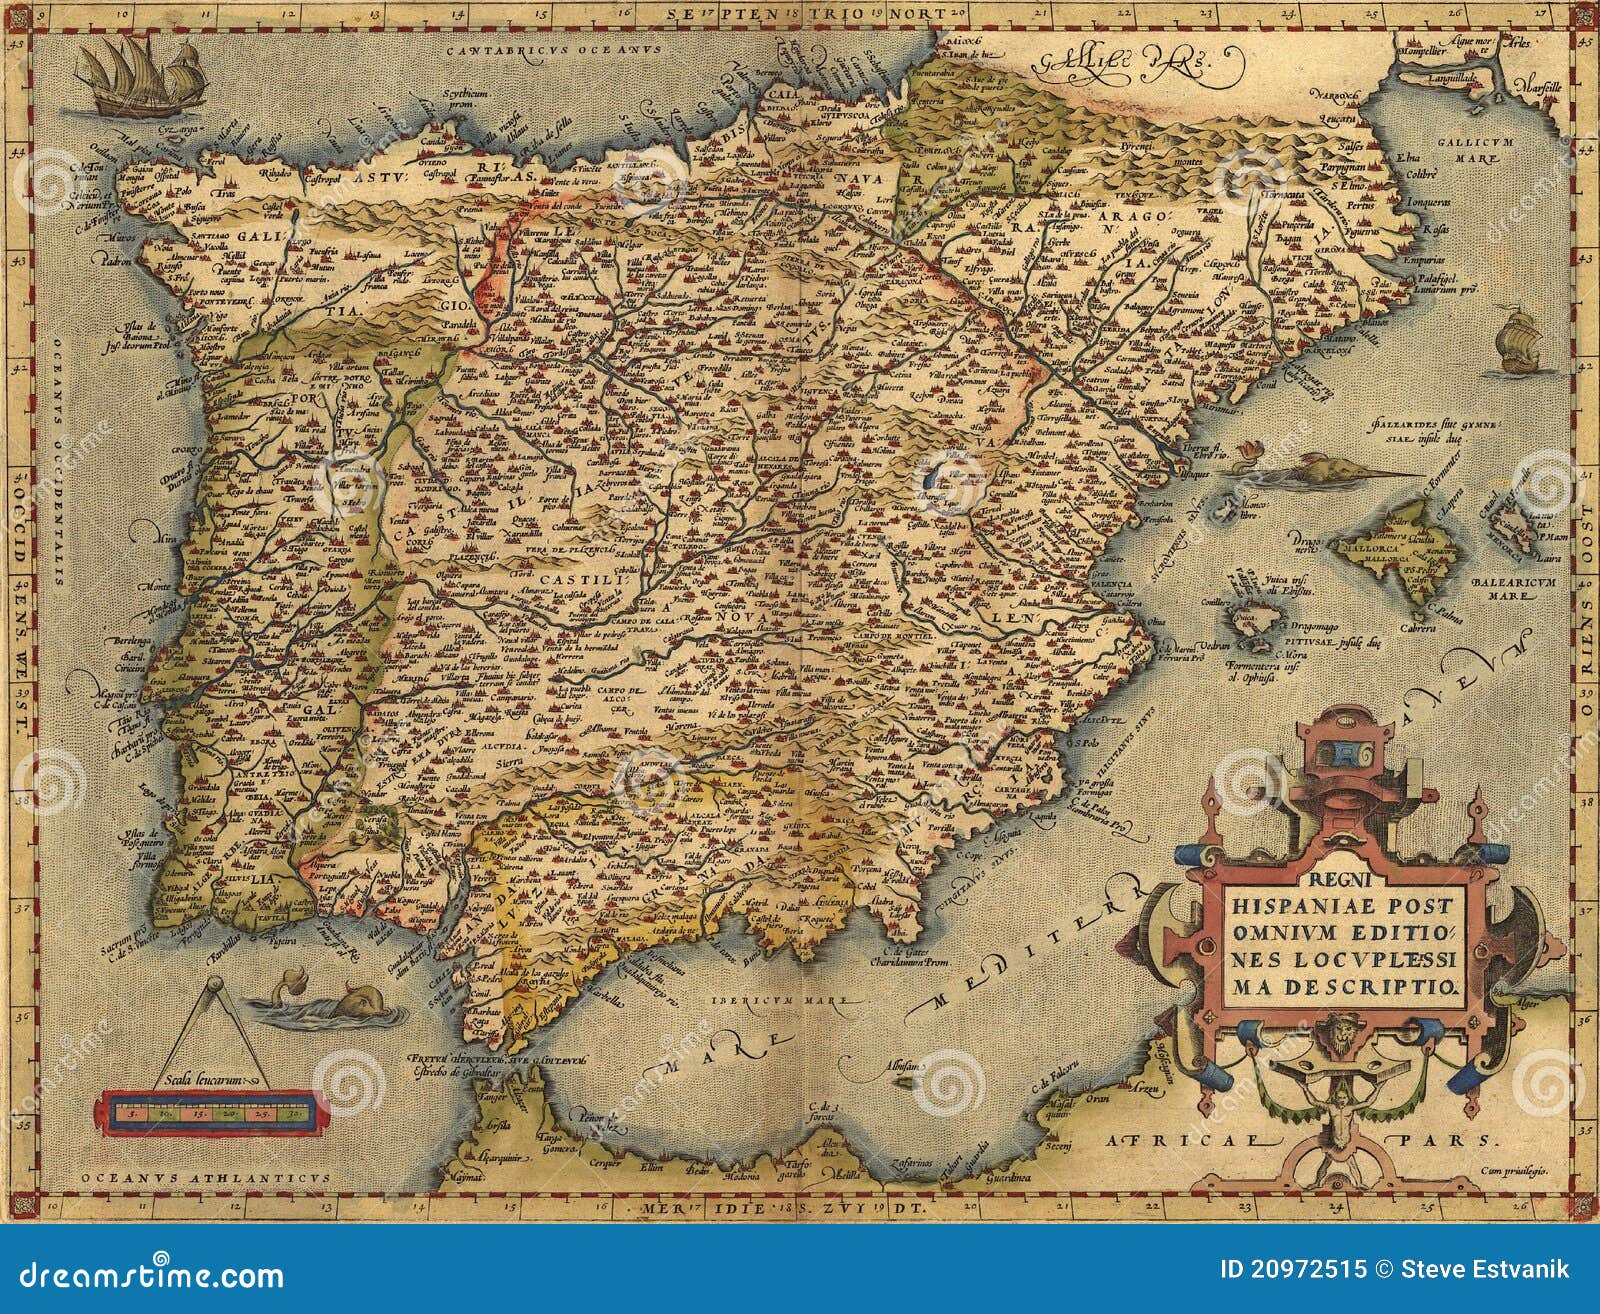 antique map of spain